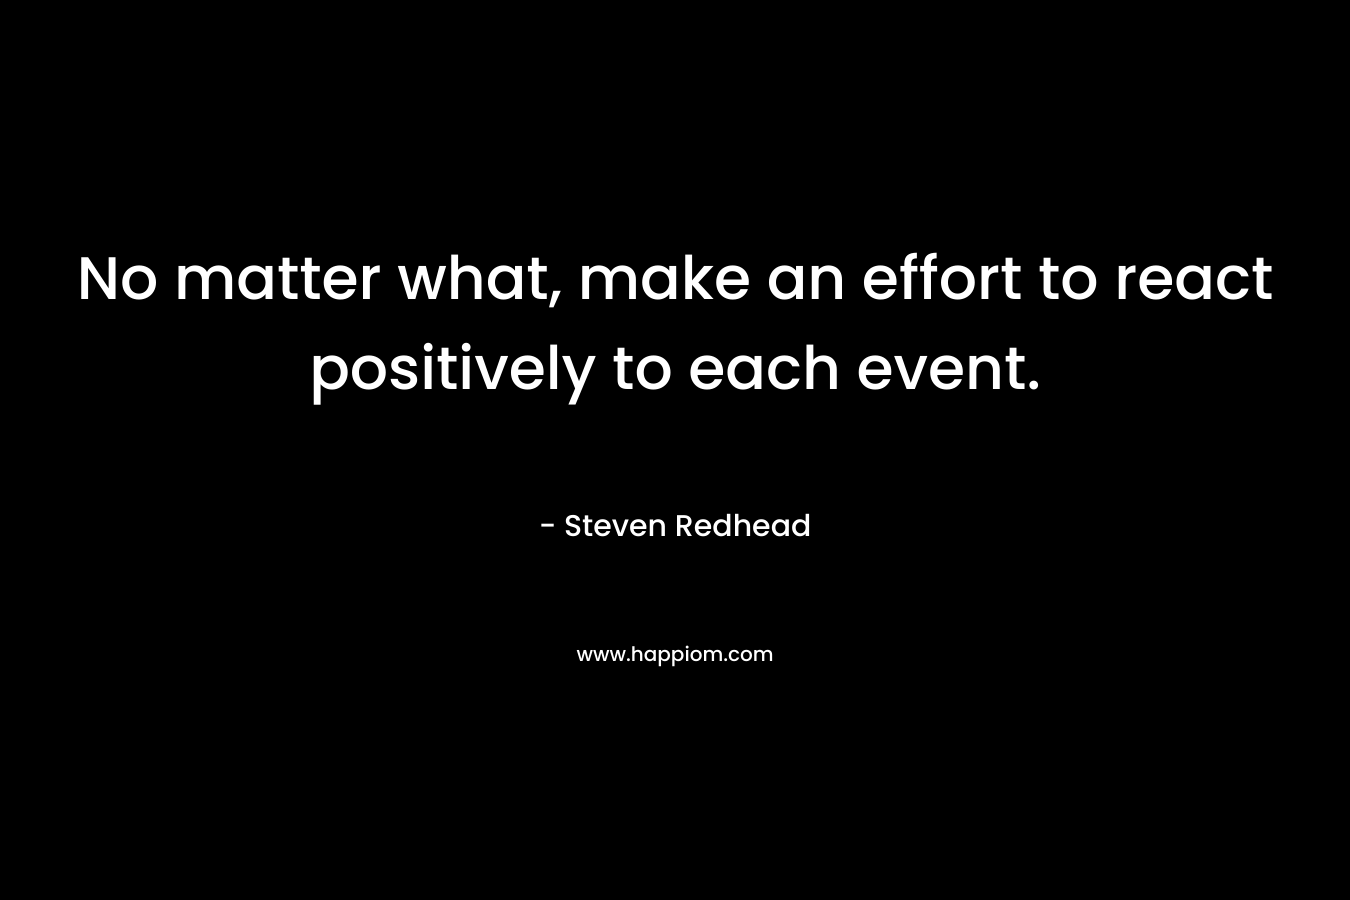 No matter what, make an effort to react positively to each event. – Steven Redhead